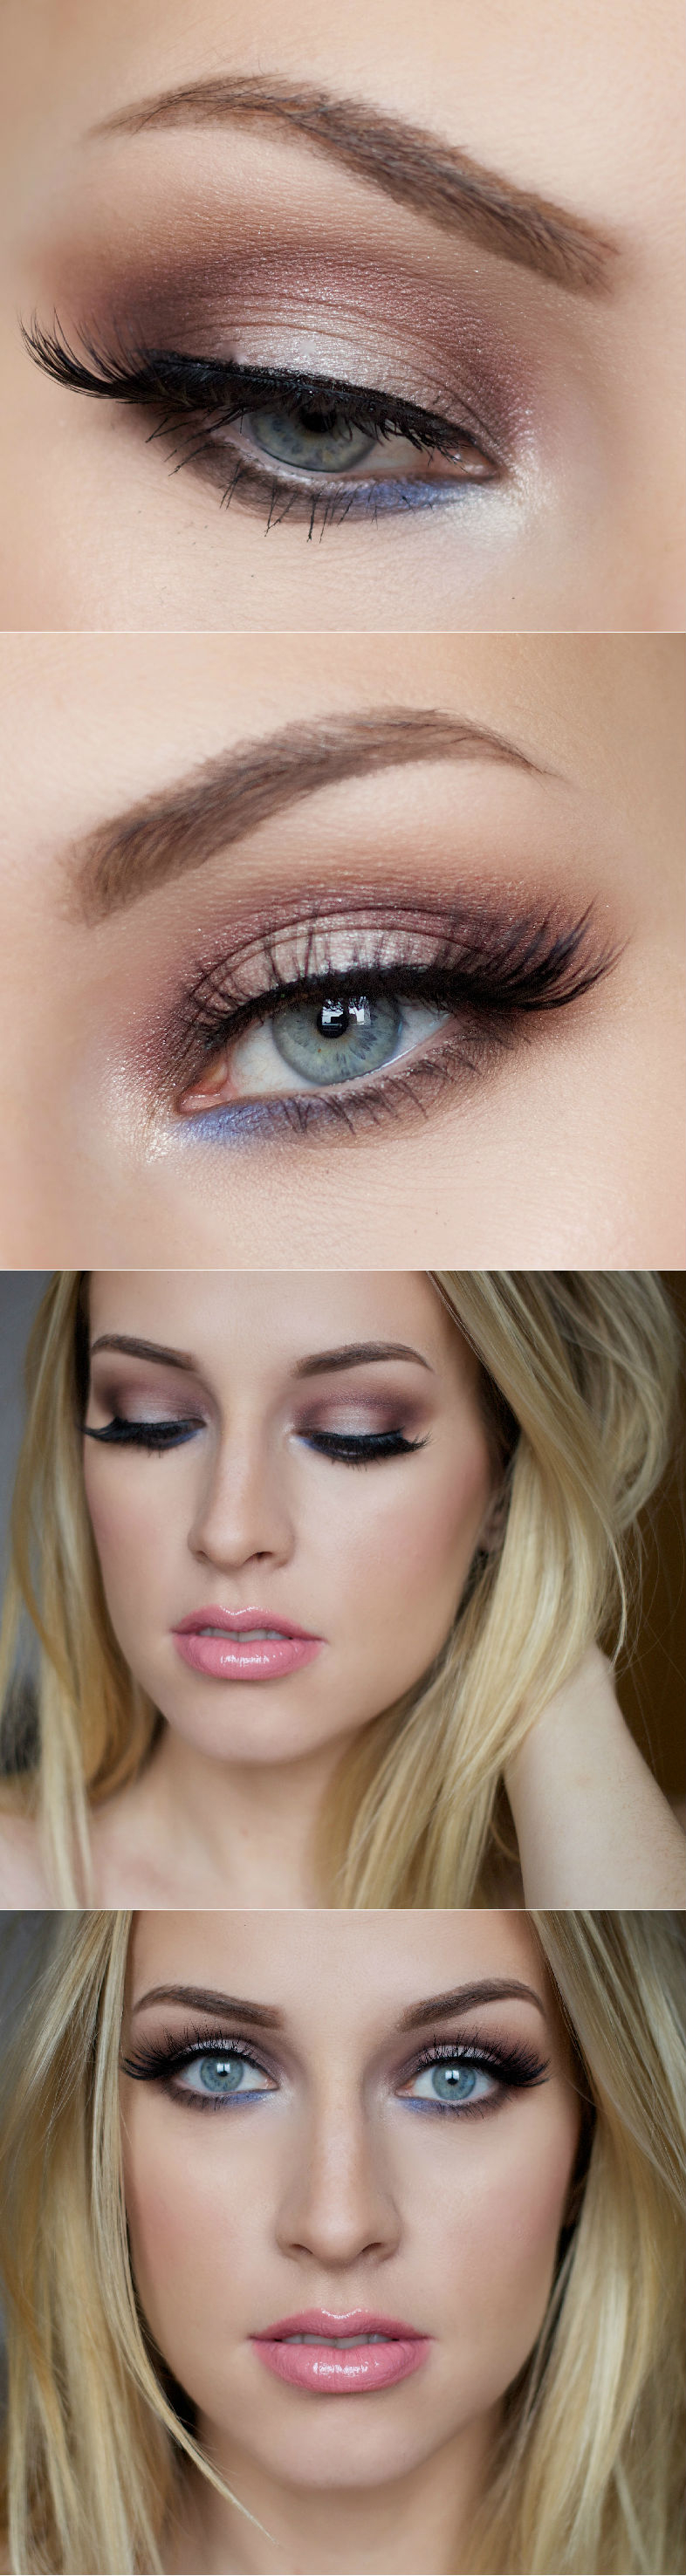 Blue Makeup For Brown Eyes 5 Ways To Make Blue Eyes Pop With Proper Eye Makeup Her Style Code